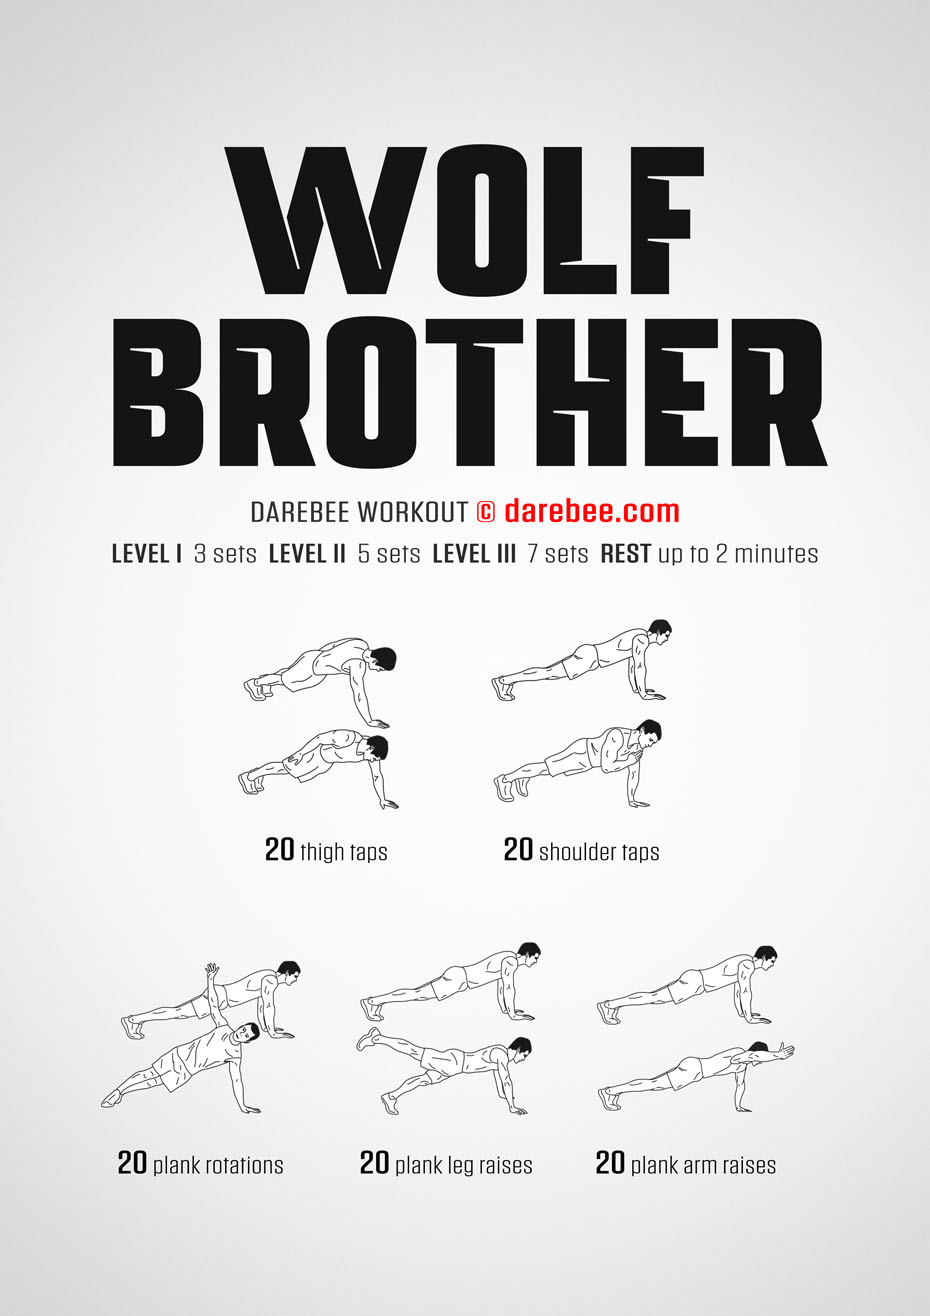 Wold Brother is a Darebee home fitness, no-equipment, total body strength workout you can do anywhere.